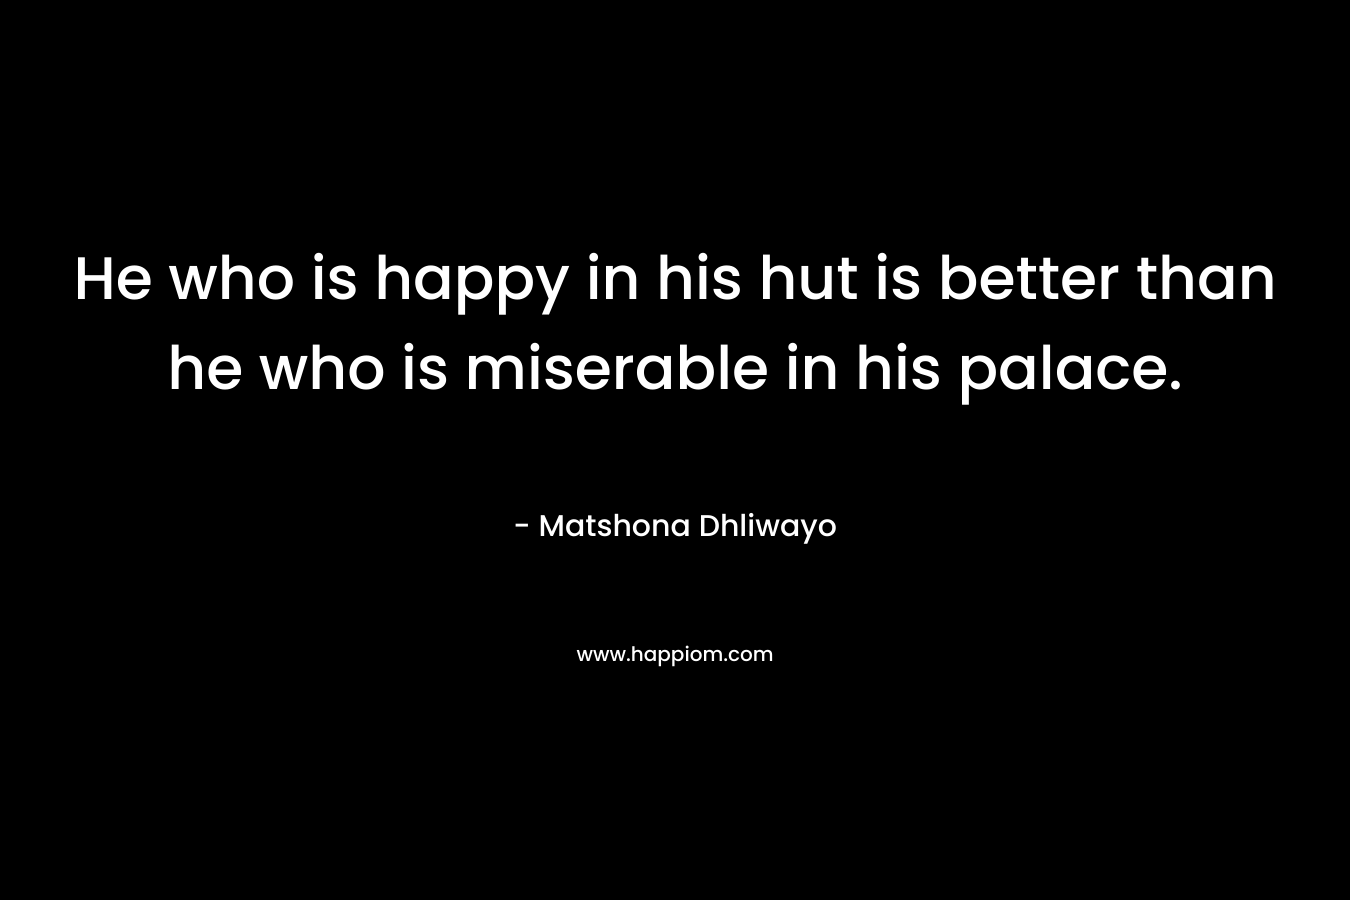 He who is happy in his hut is better than he who is miserable in his palace. – Matshona Dhliwayo